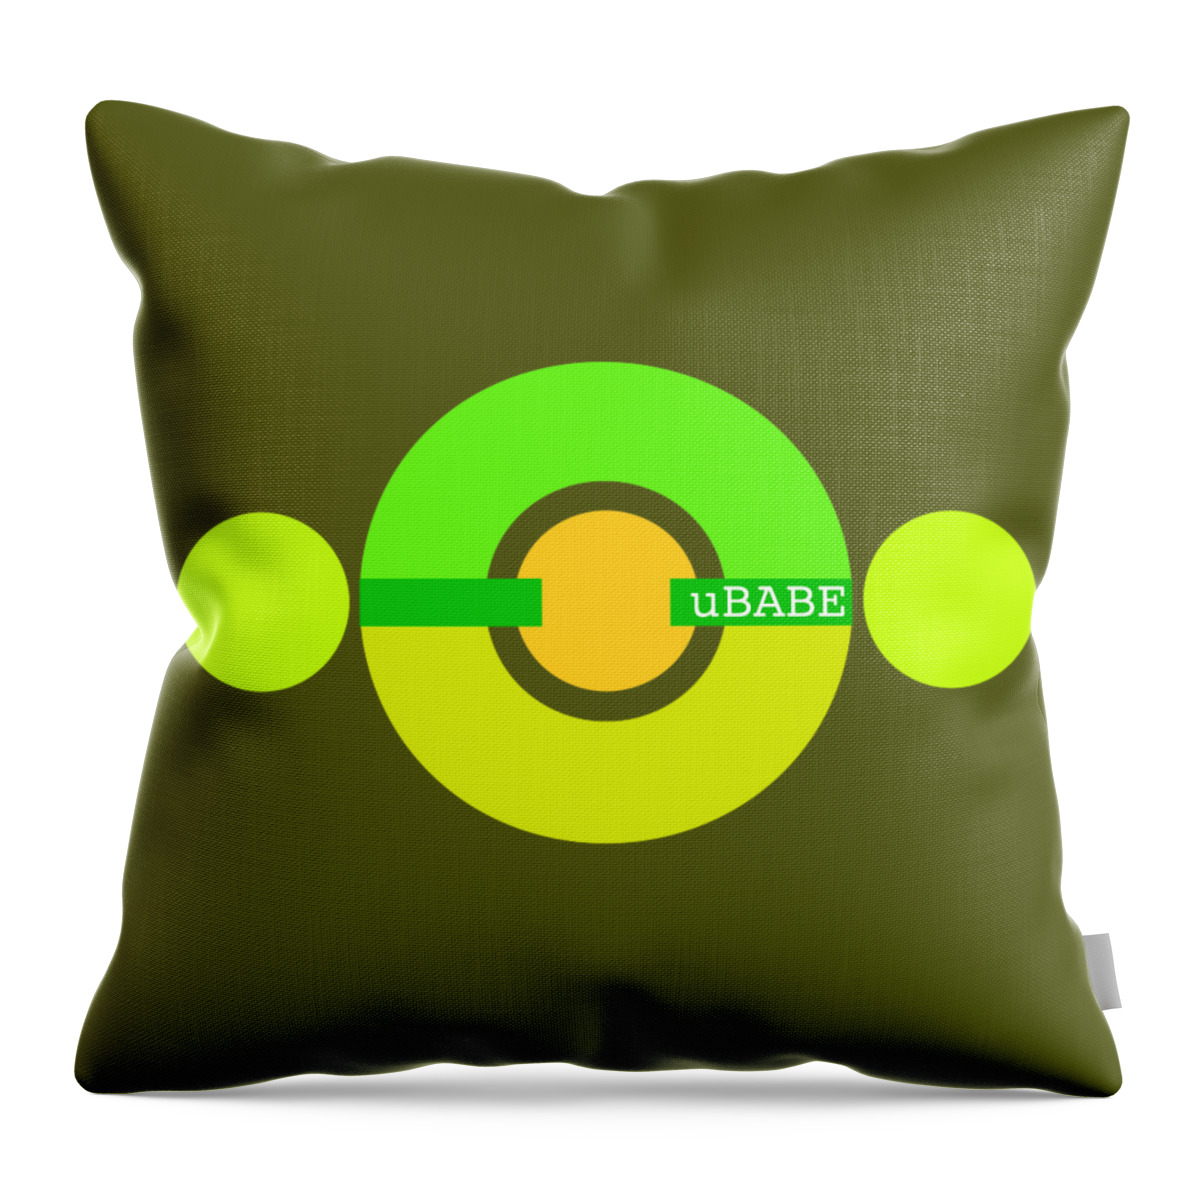 Cool Green Throw Pillow featuring the digital art Spring Sunshine by Ubabe Style